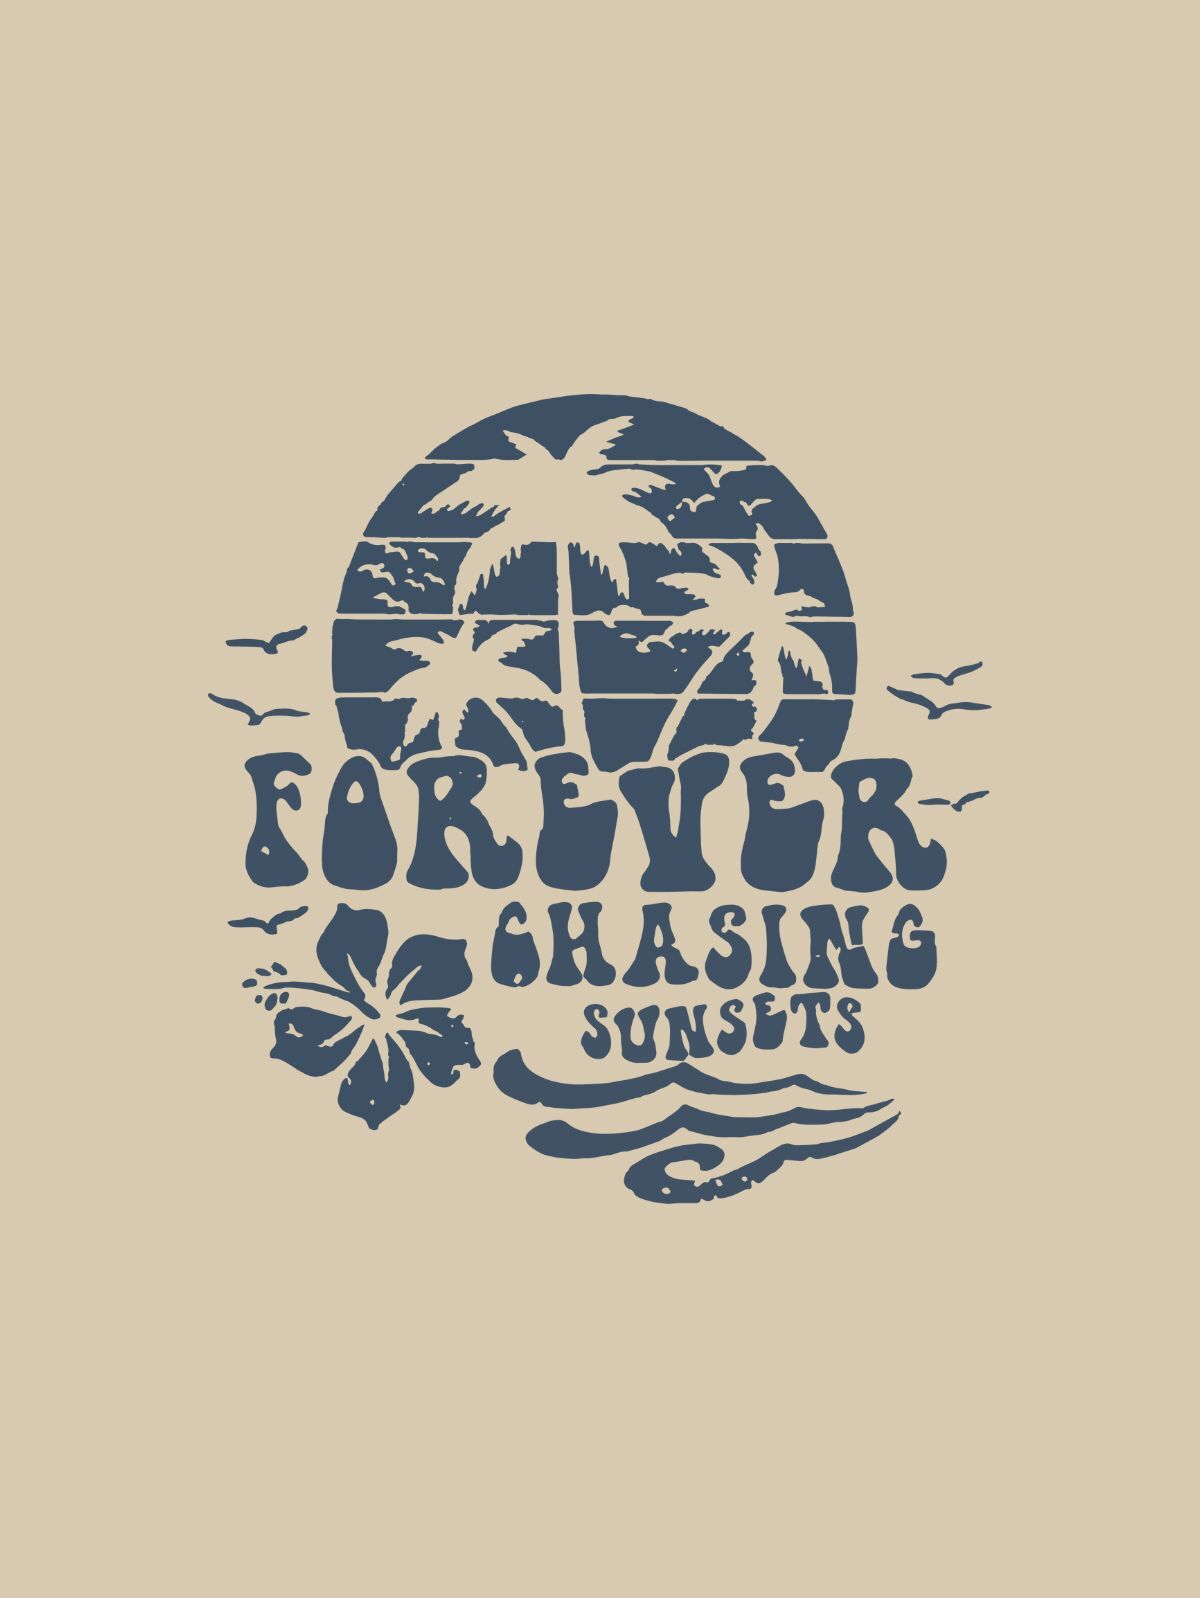 Forever Chasing Sunset Mauve Classic Fit T-Shirt